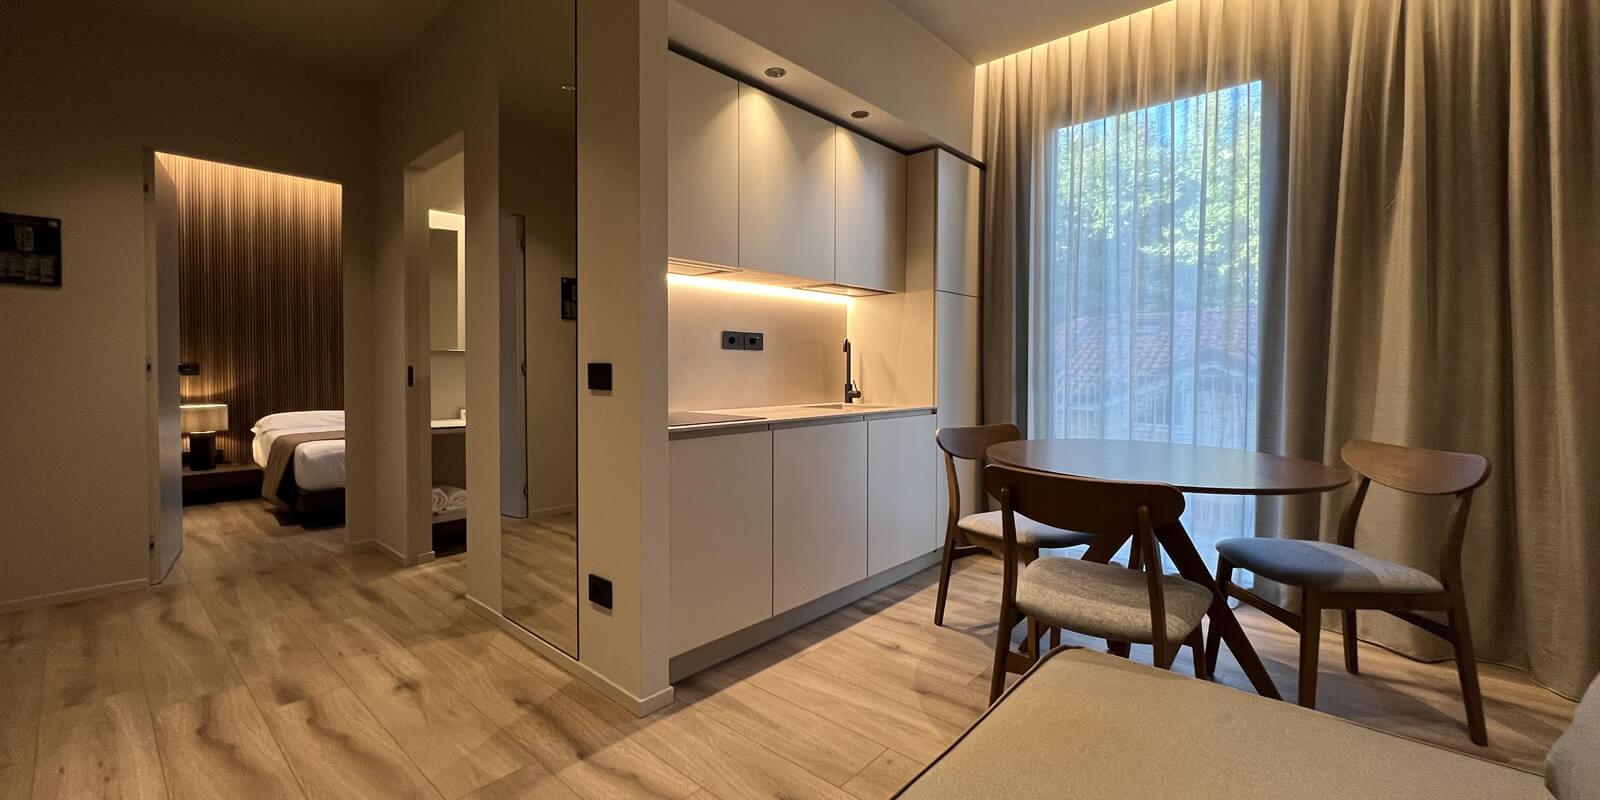 Modern apartment with kitchen, dining area, and separate bedroom.